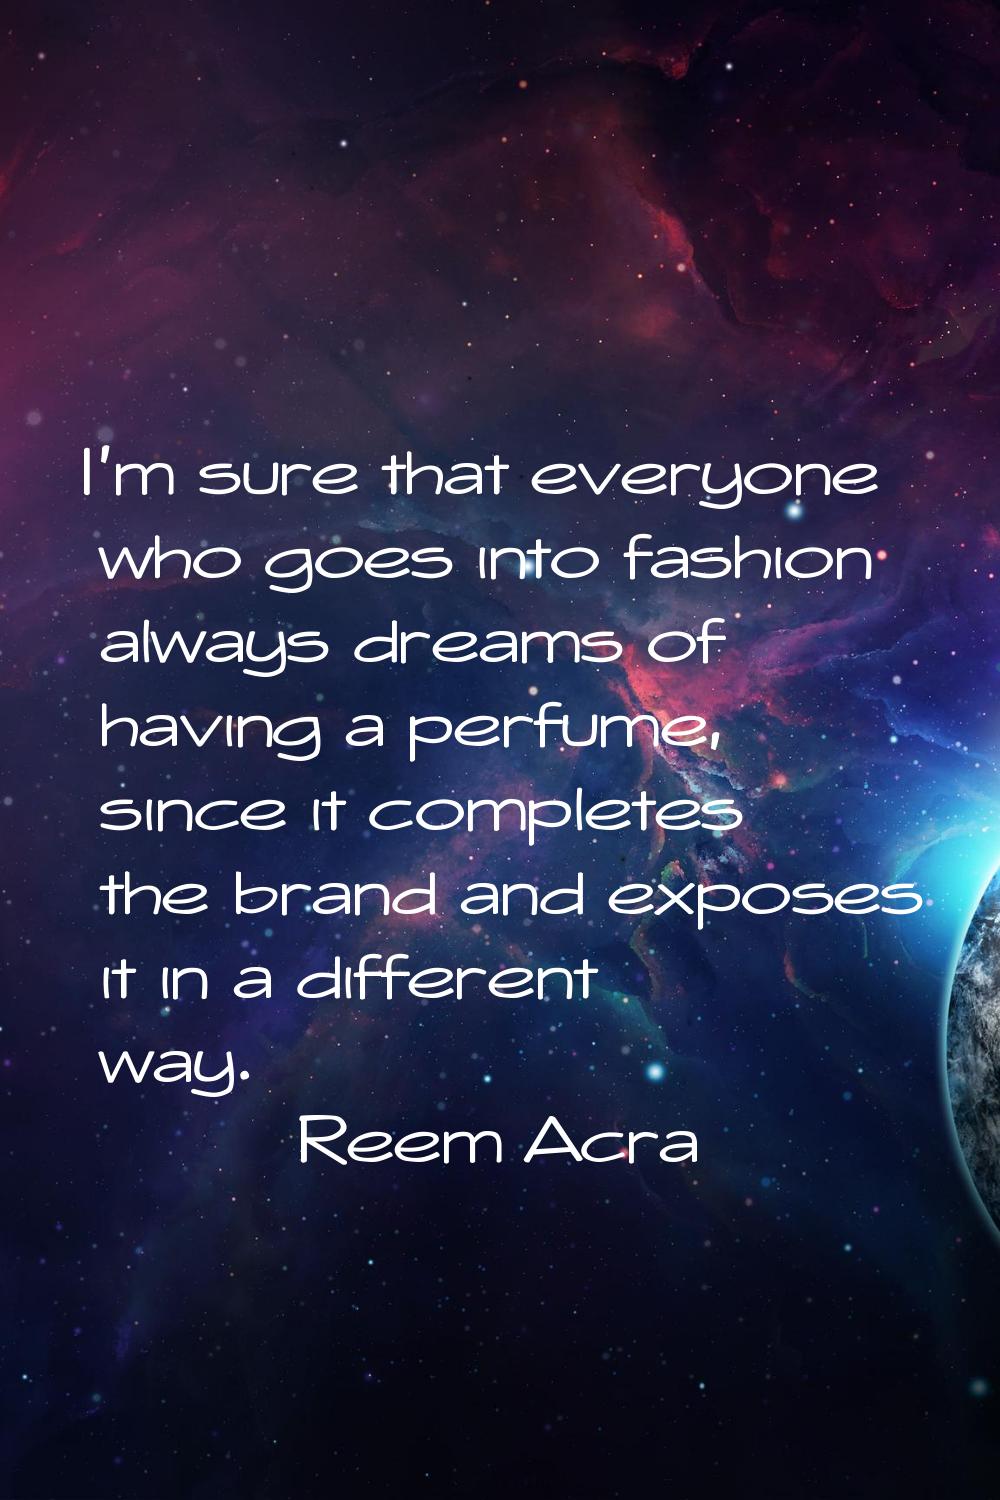 I'm sure that everyone who goes into fashion always dreams of having a perfume, since it completes 